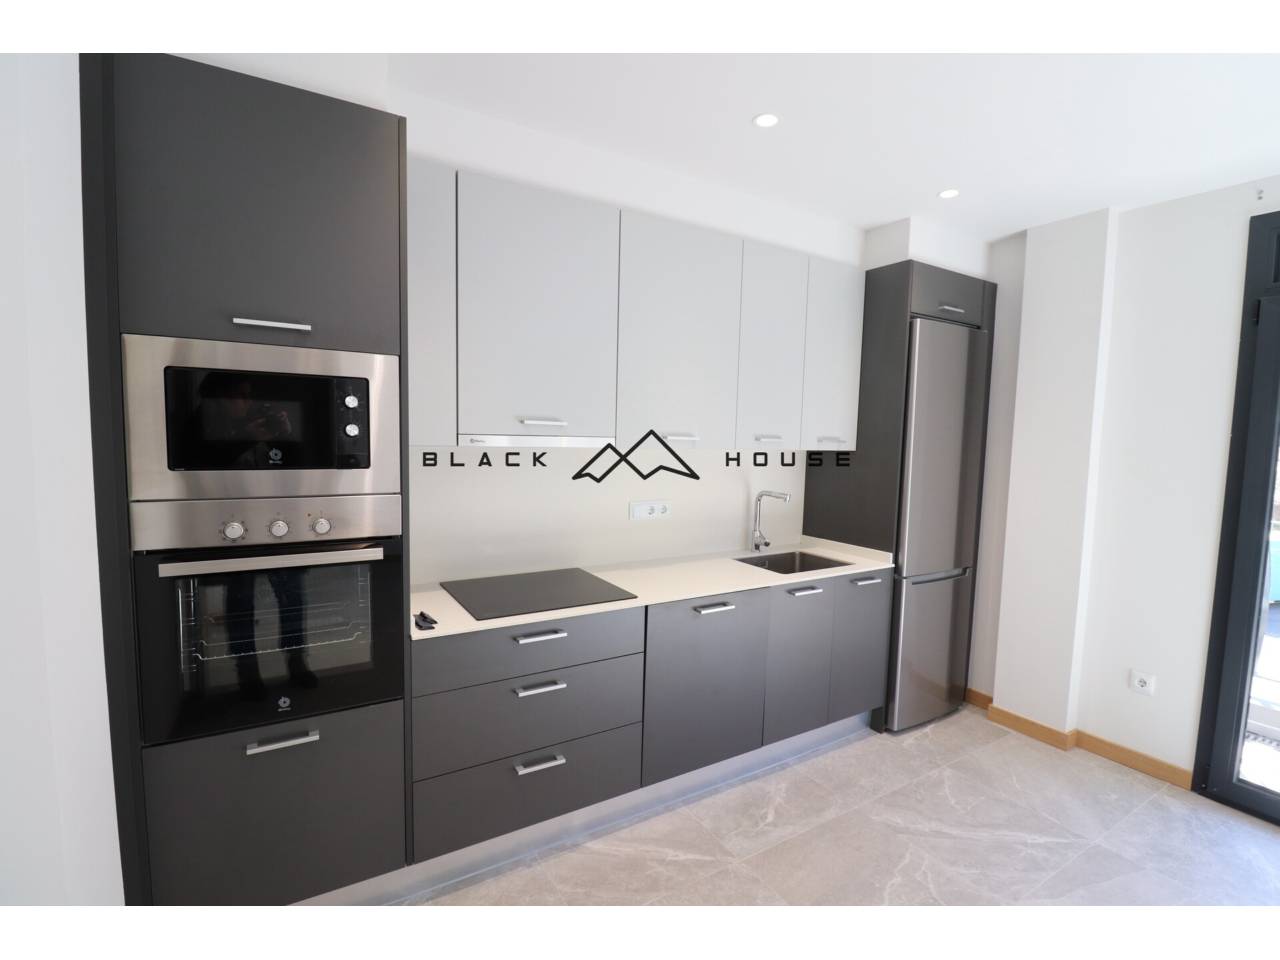 Newly built rental apartment located in the center of Andorra la Vella.